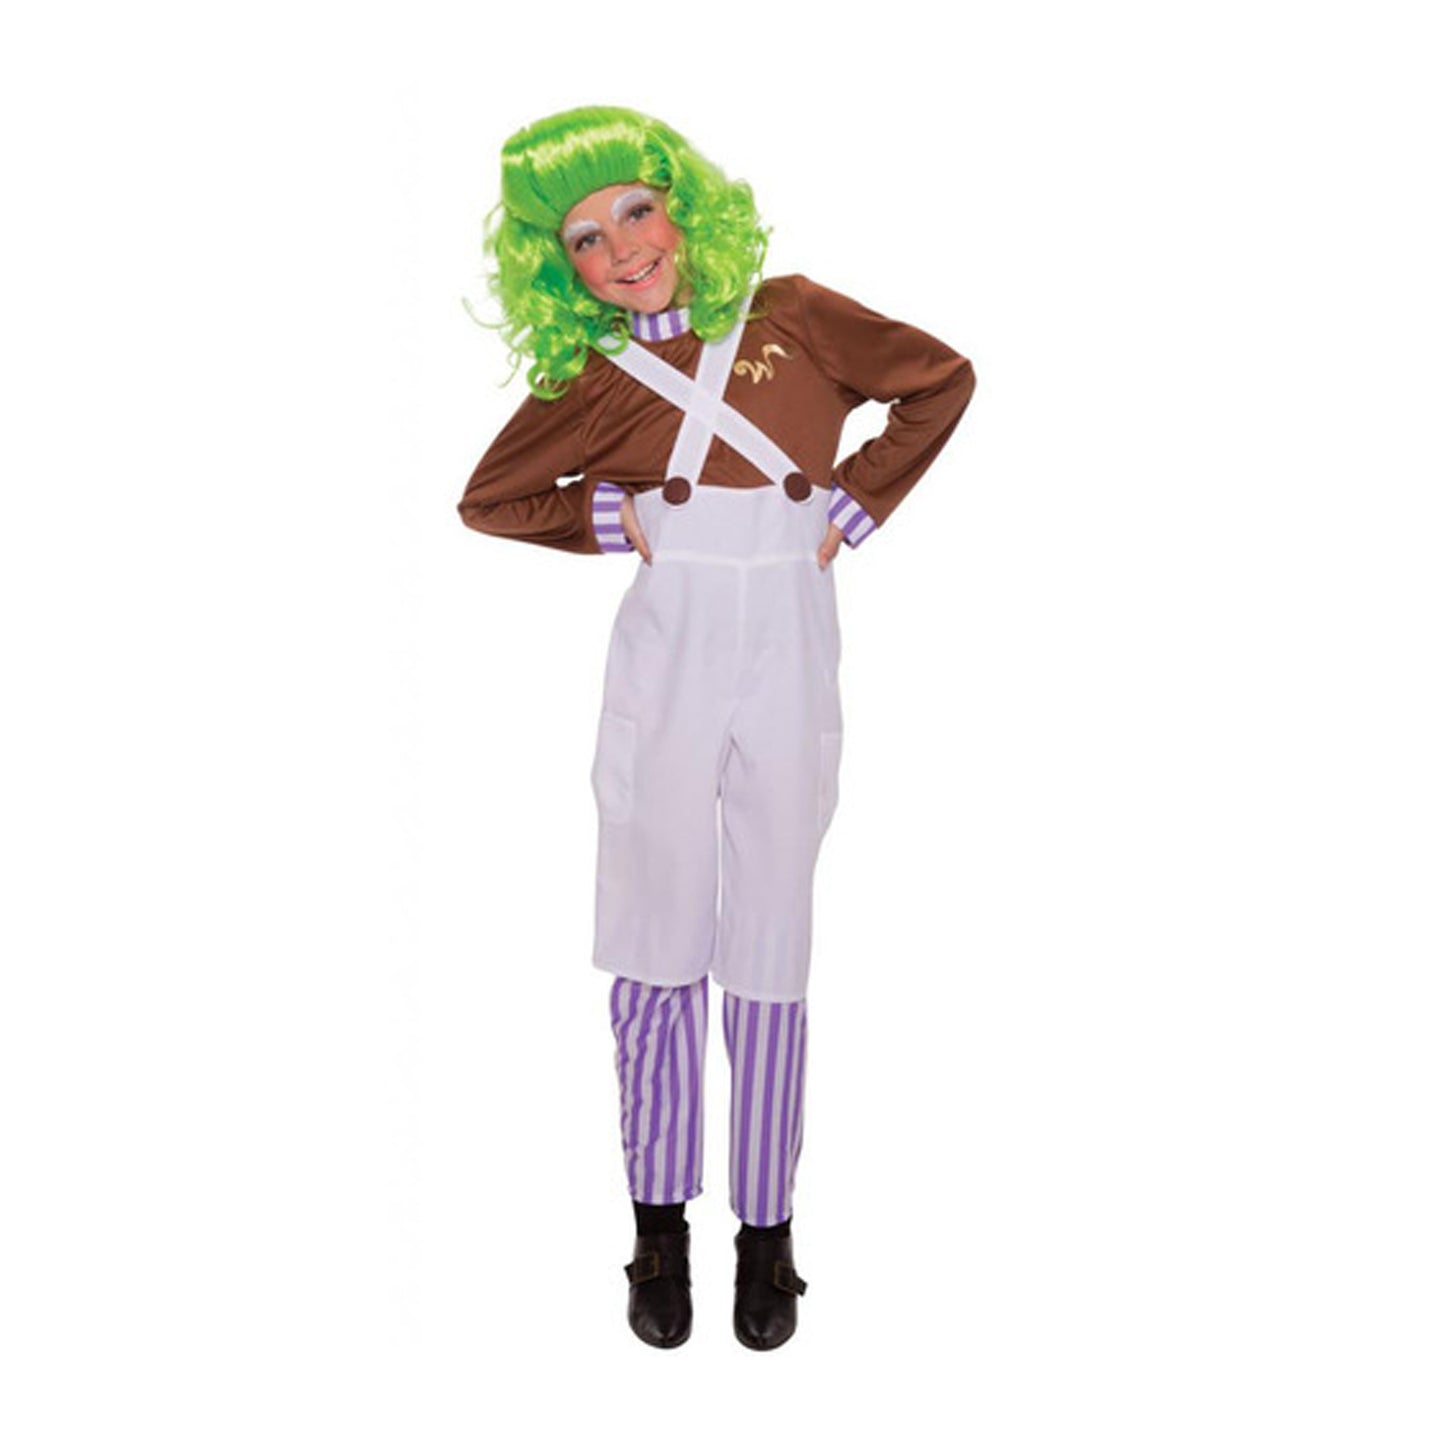 Chocolate Factory Worker